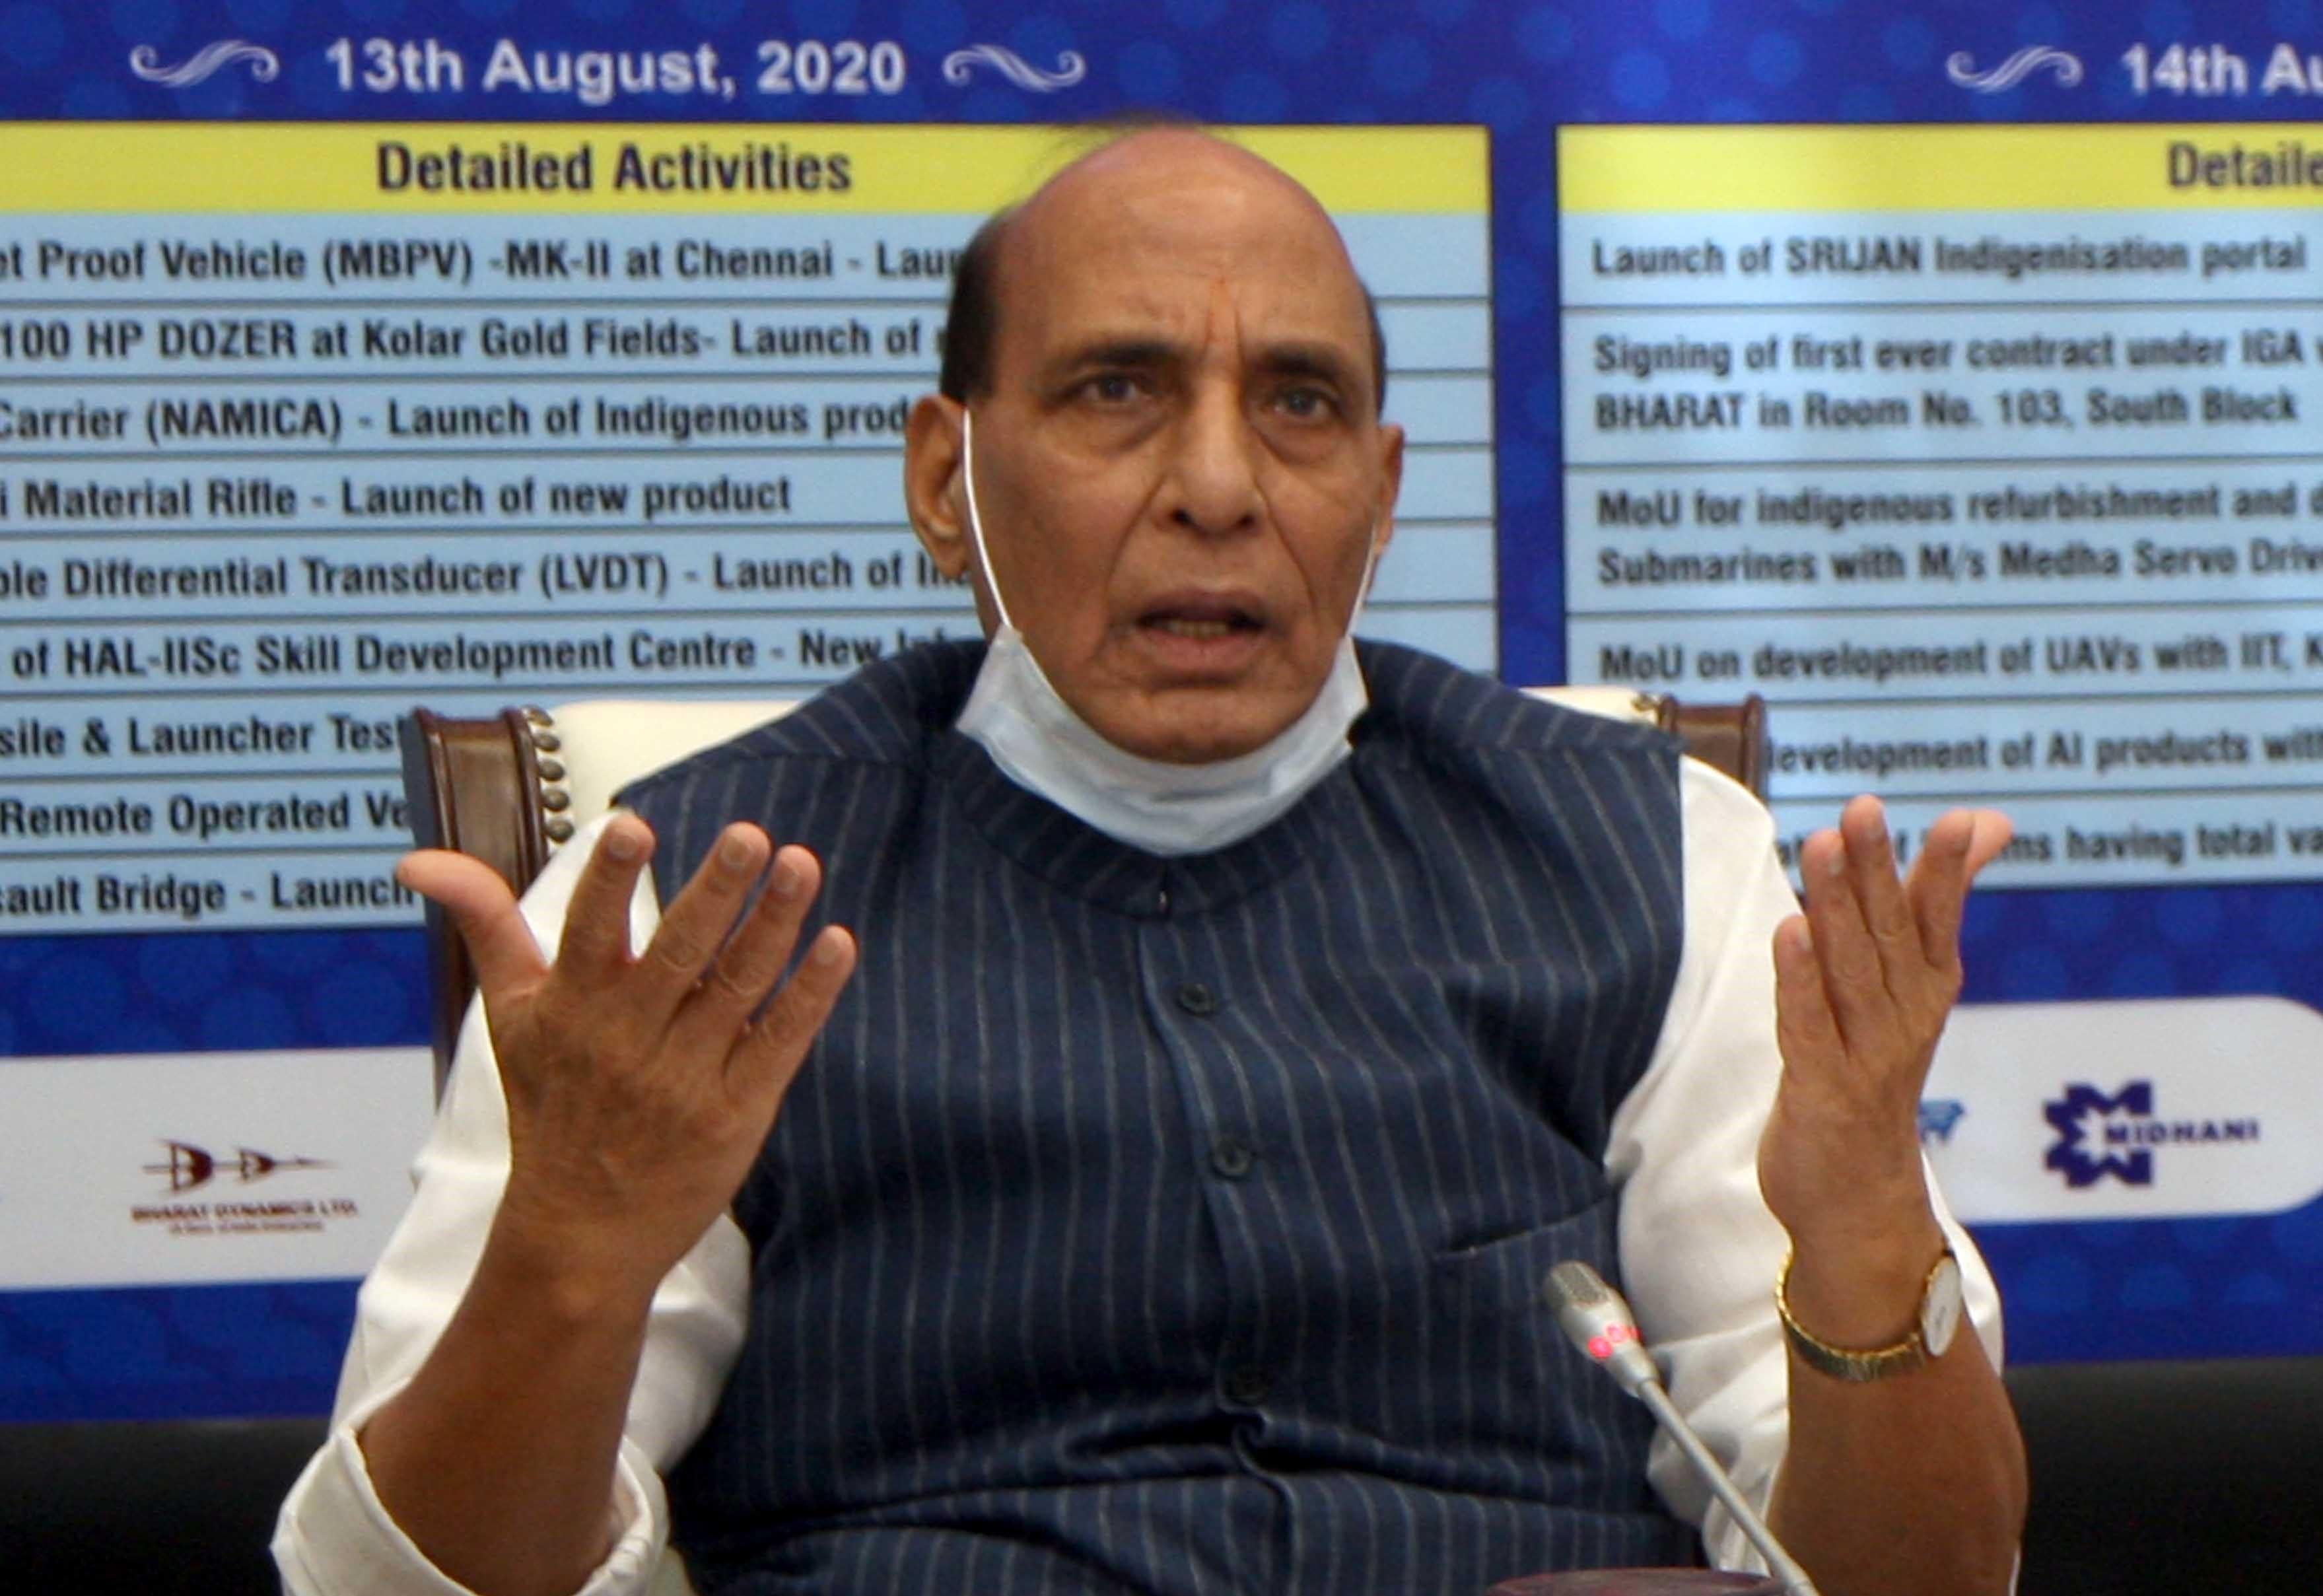 Atmanirbhar Bharat: Rajnath Singh launches 15 products developed by defence PSUs and OFB